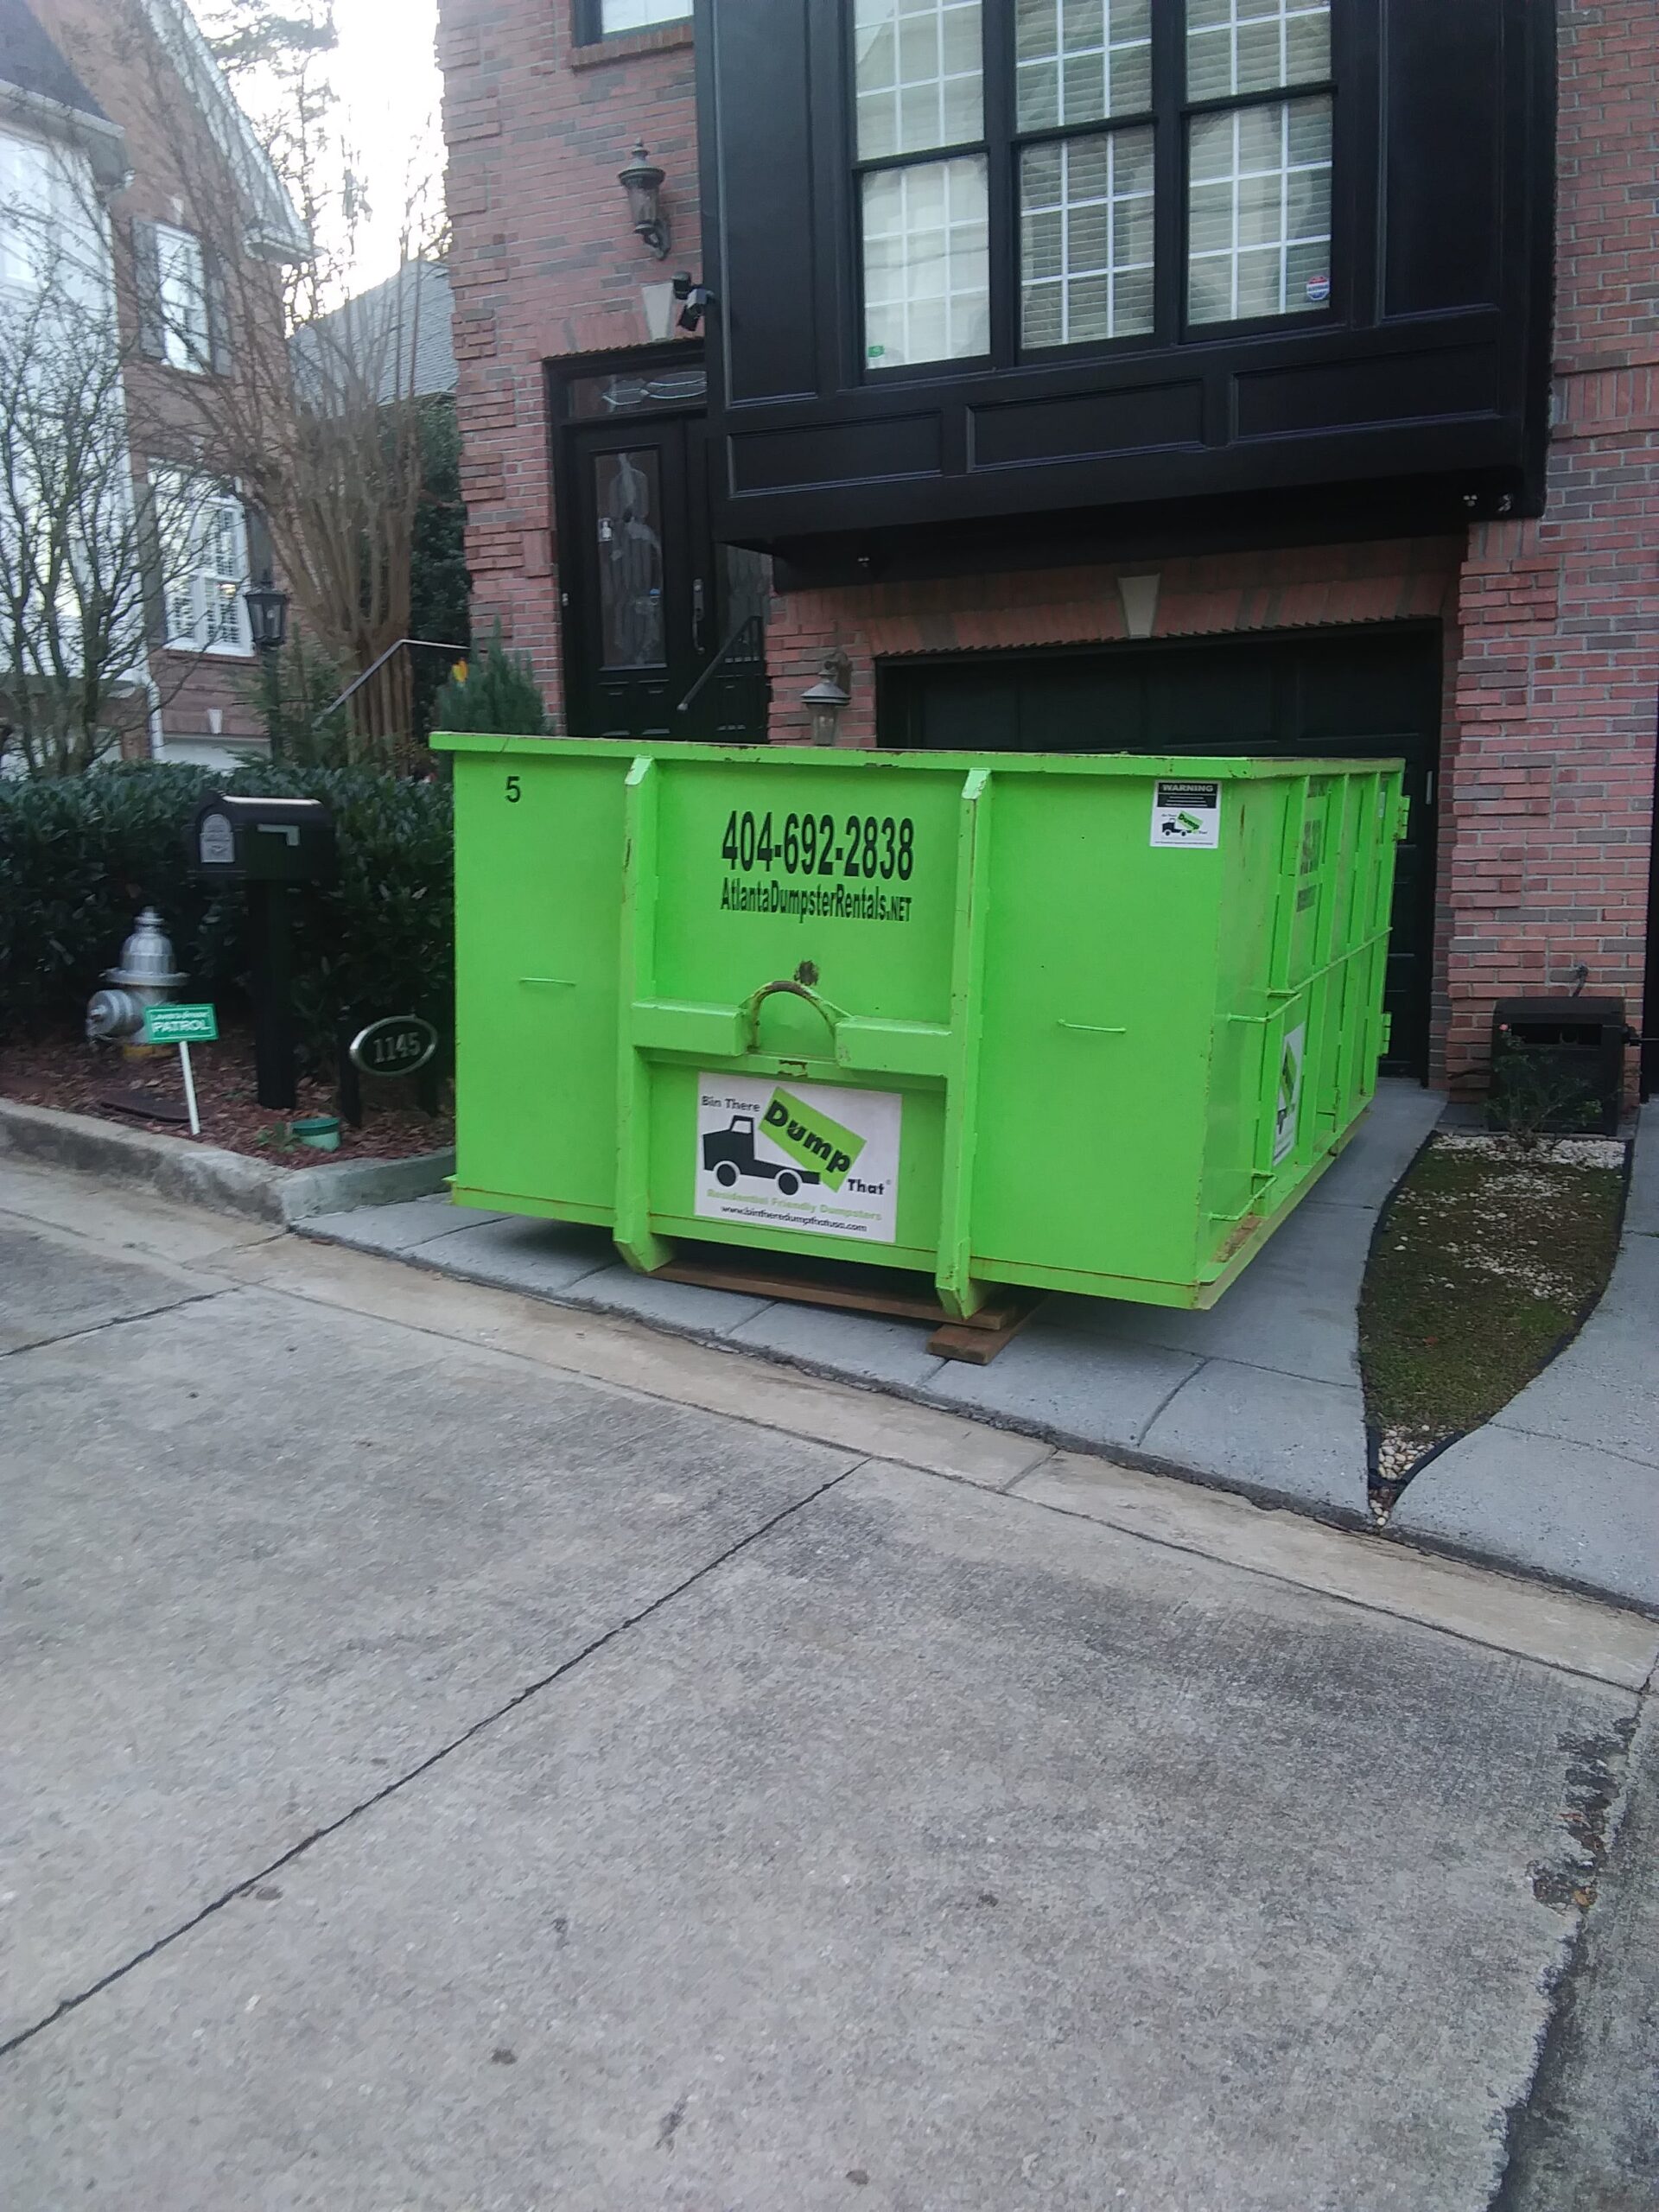 Dumpster in front of house